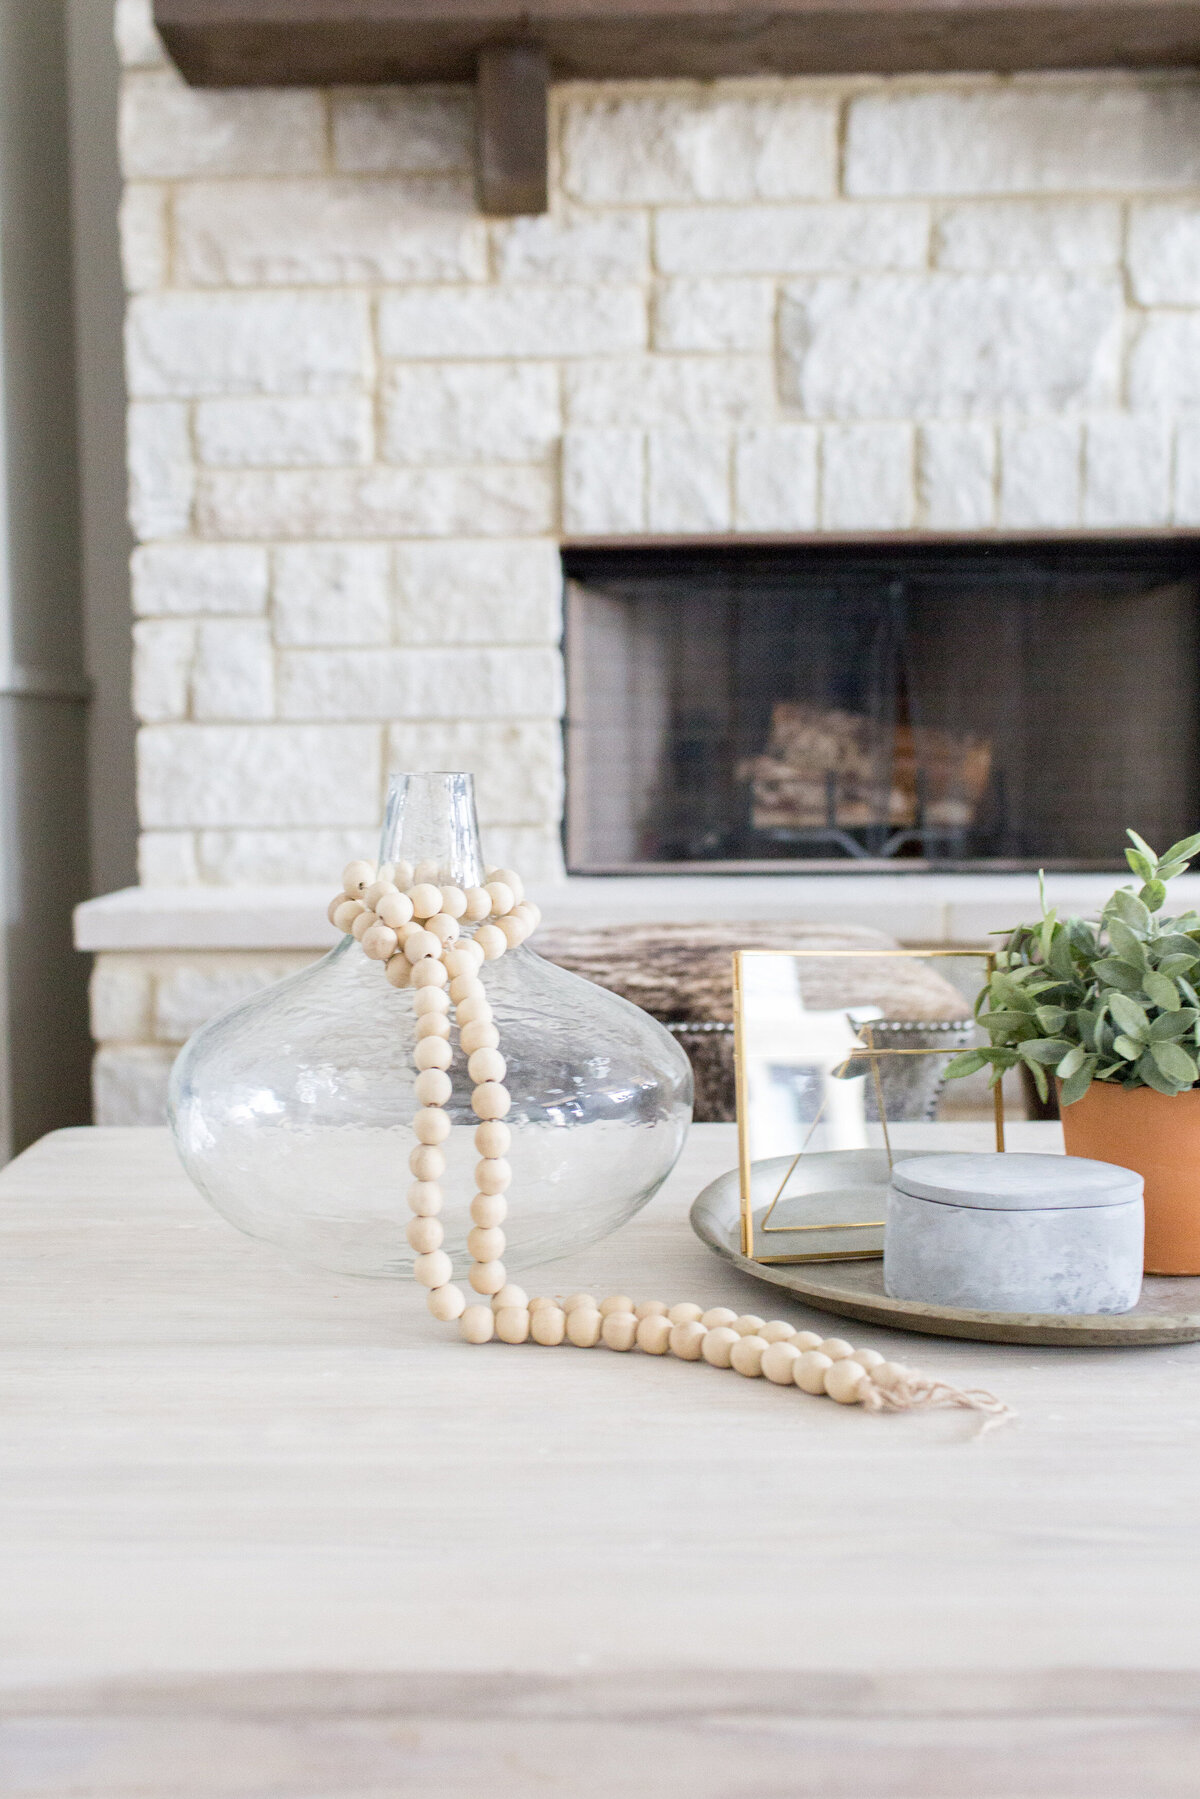 decor on table in front of stone fireplace